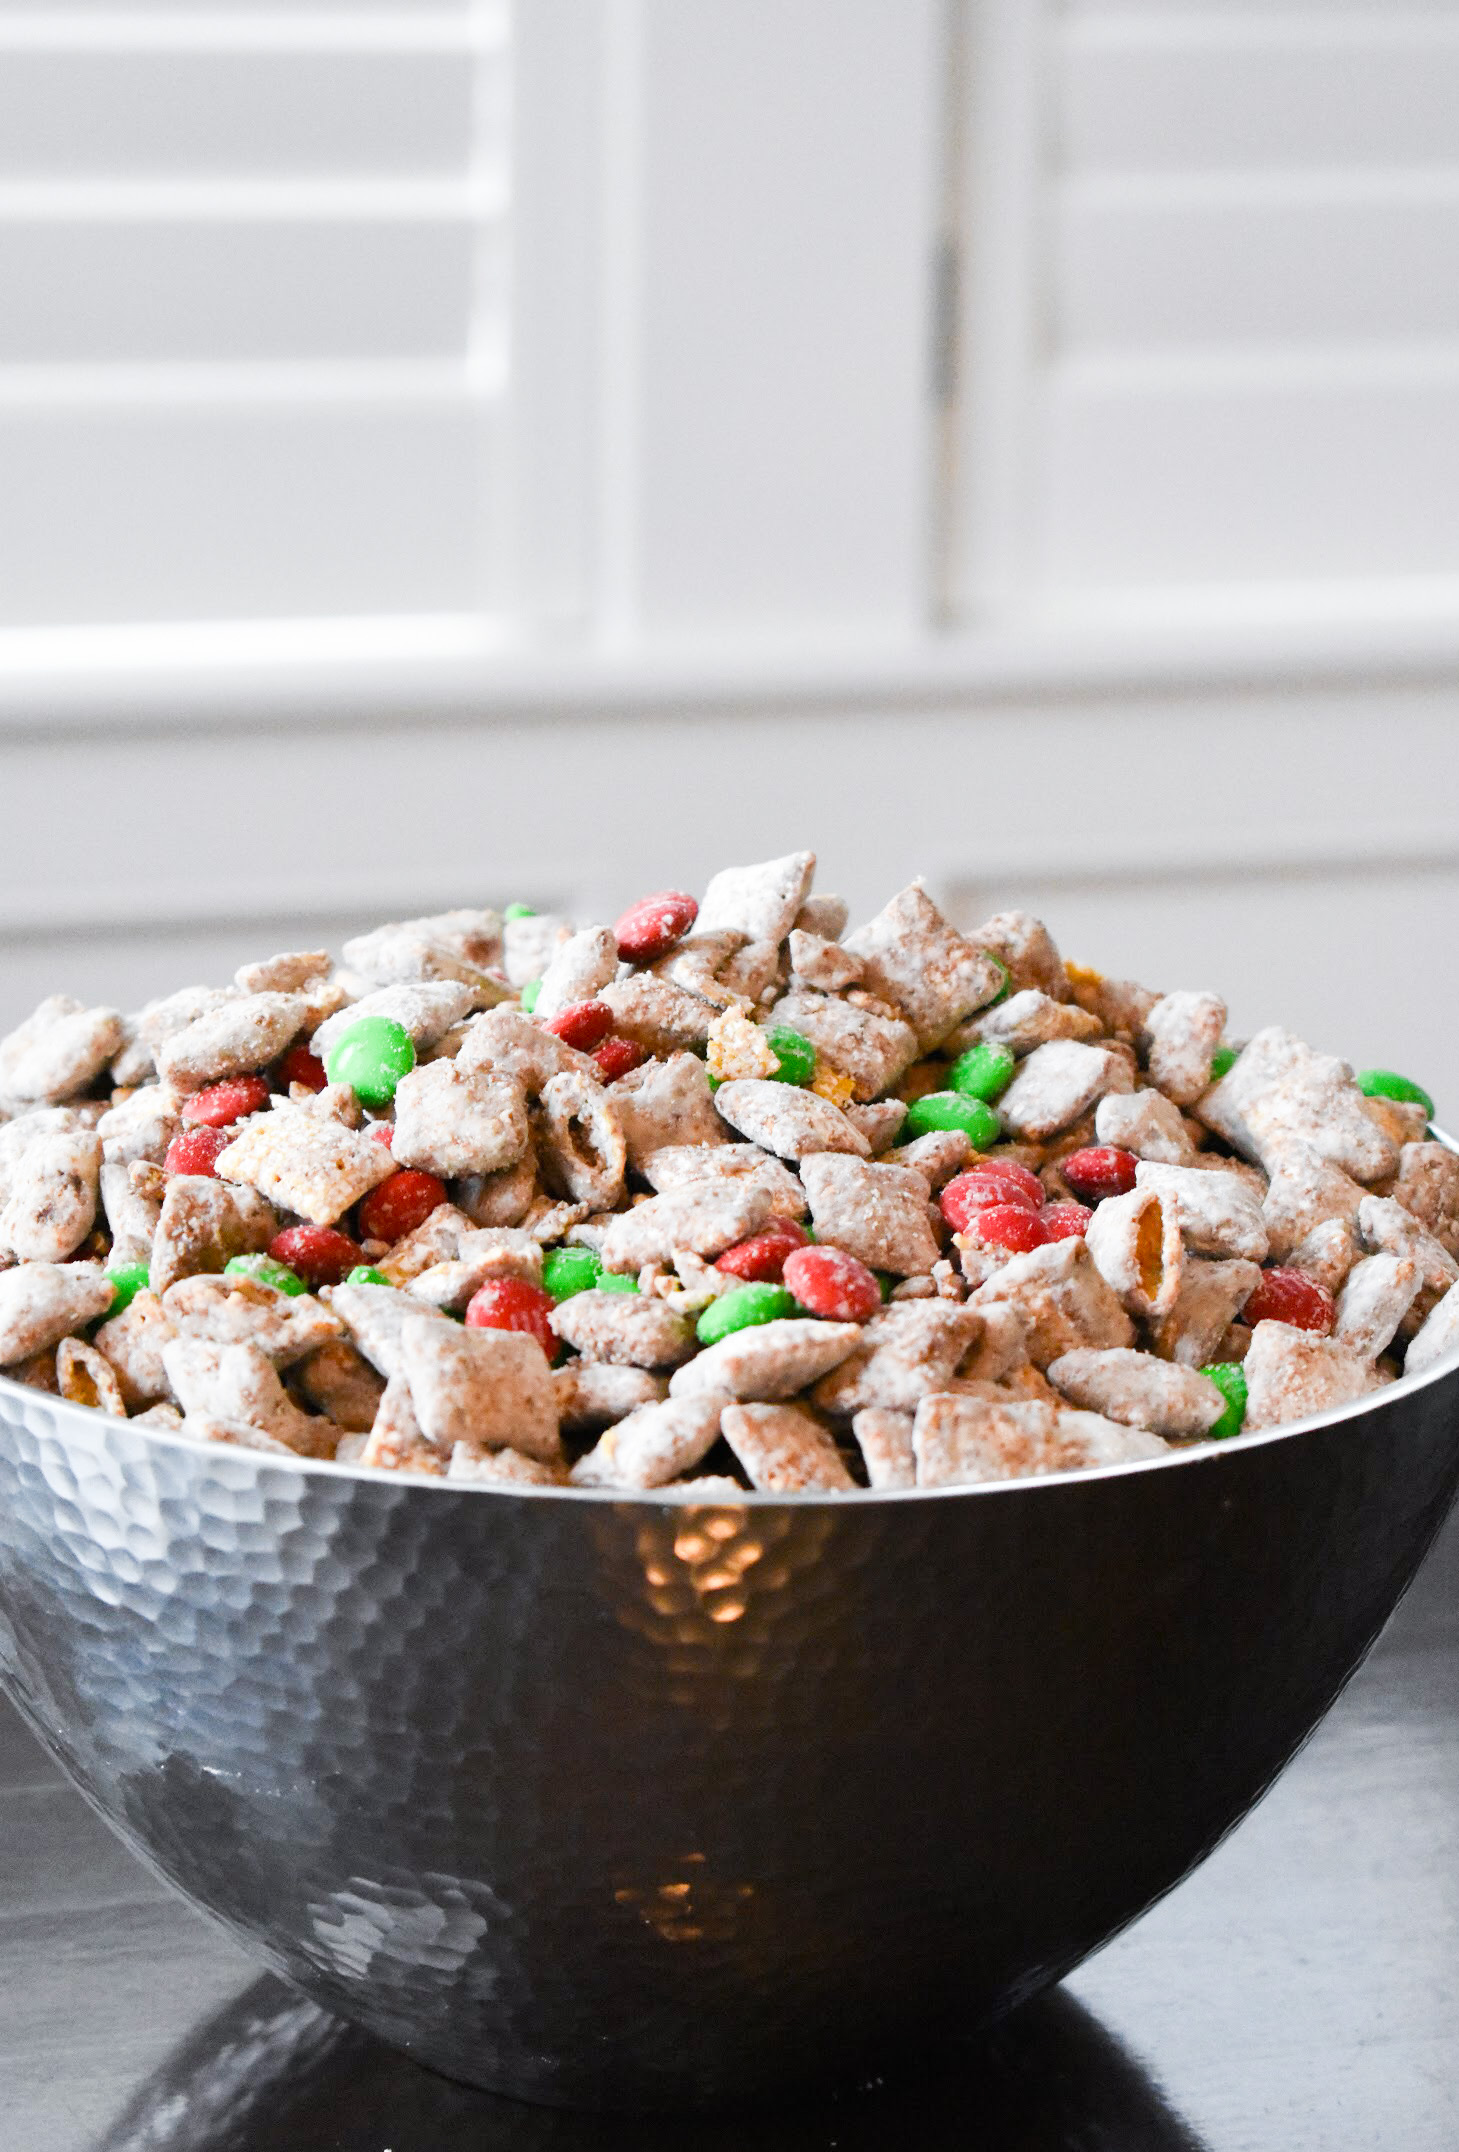 Your family will love this kid-friendly Christmas dessert recipe for Reindeer Treats! It doesn't matter whether you call it Reindeer Treats, Reindeer Chow, Christmas Muddy Buddies, or even Puppy Chow... everyone loves a big bowl of this stuff! This holiday version is even more festive with the addition of red and green candies.